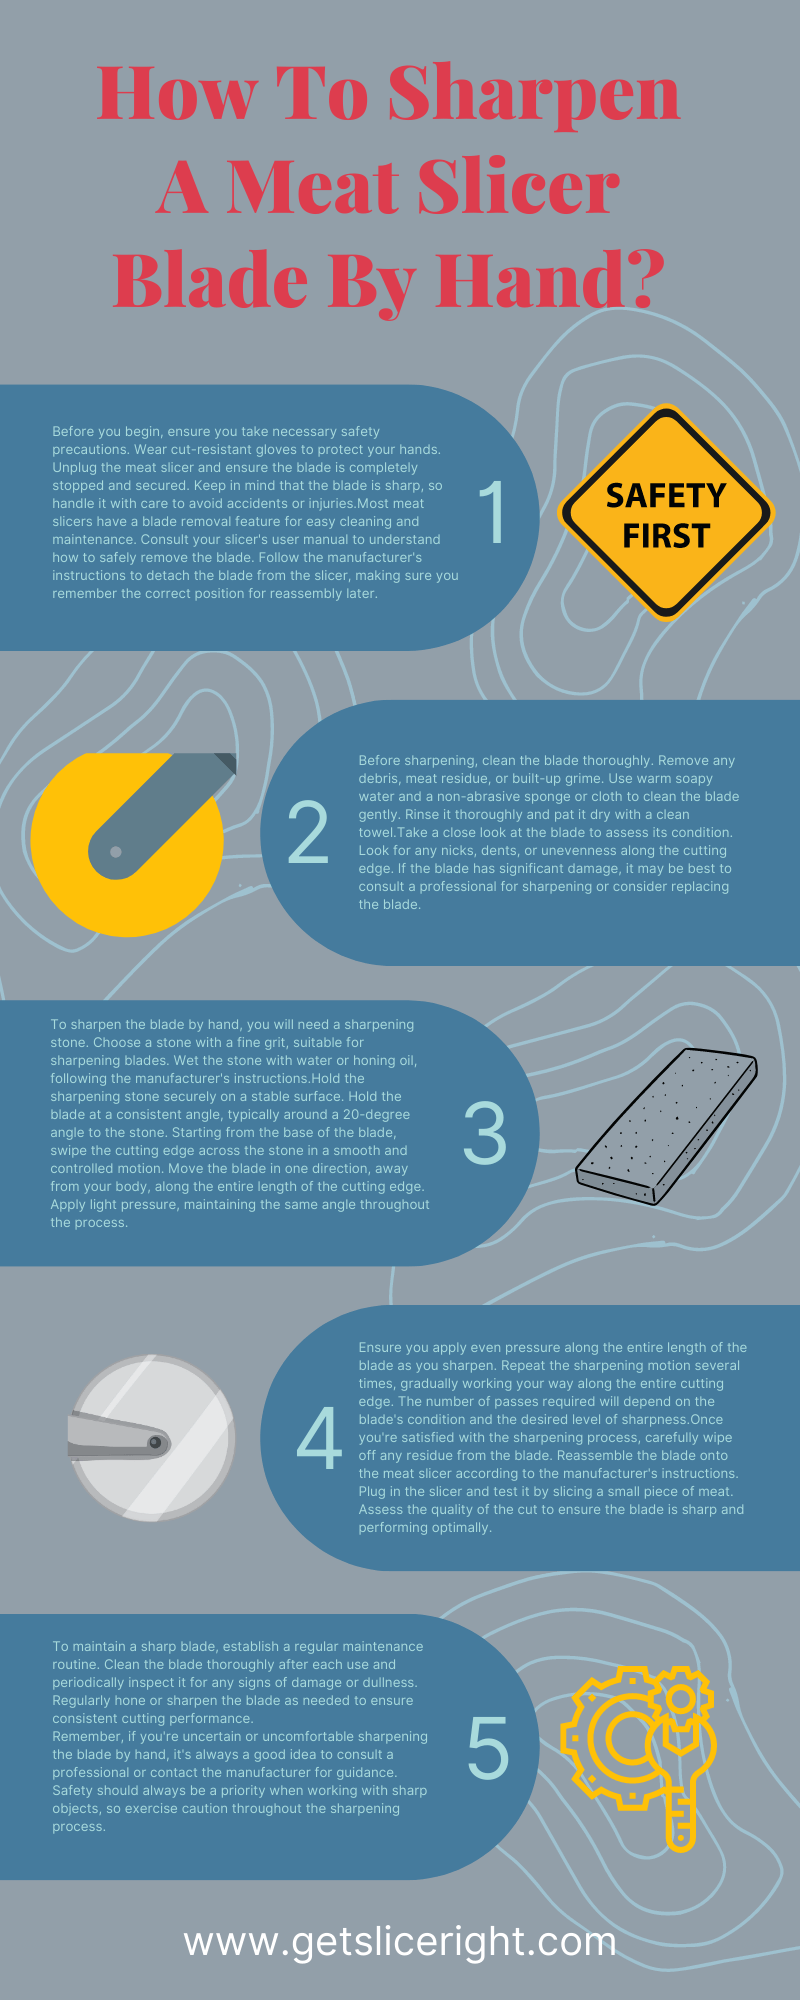 How to sharpen a meat slicer blade by hand - infographics